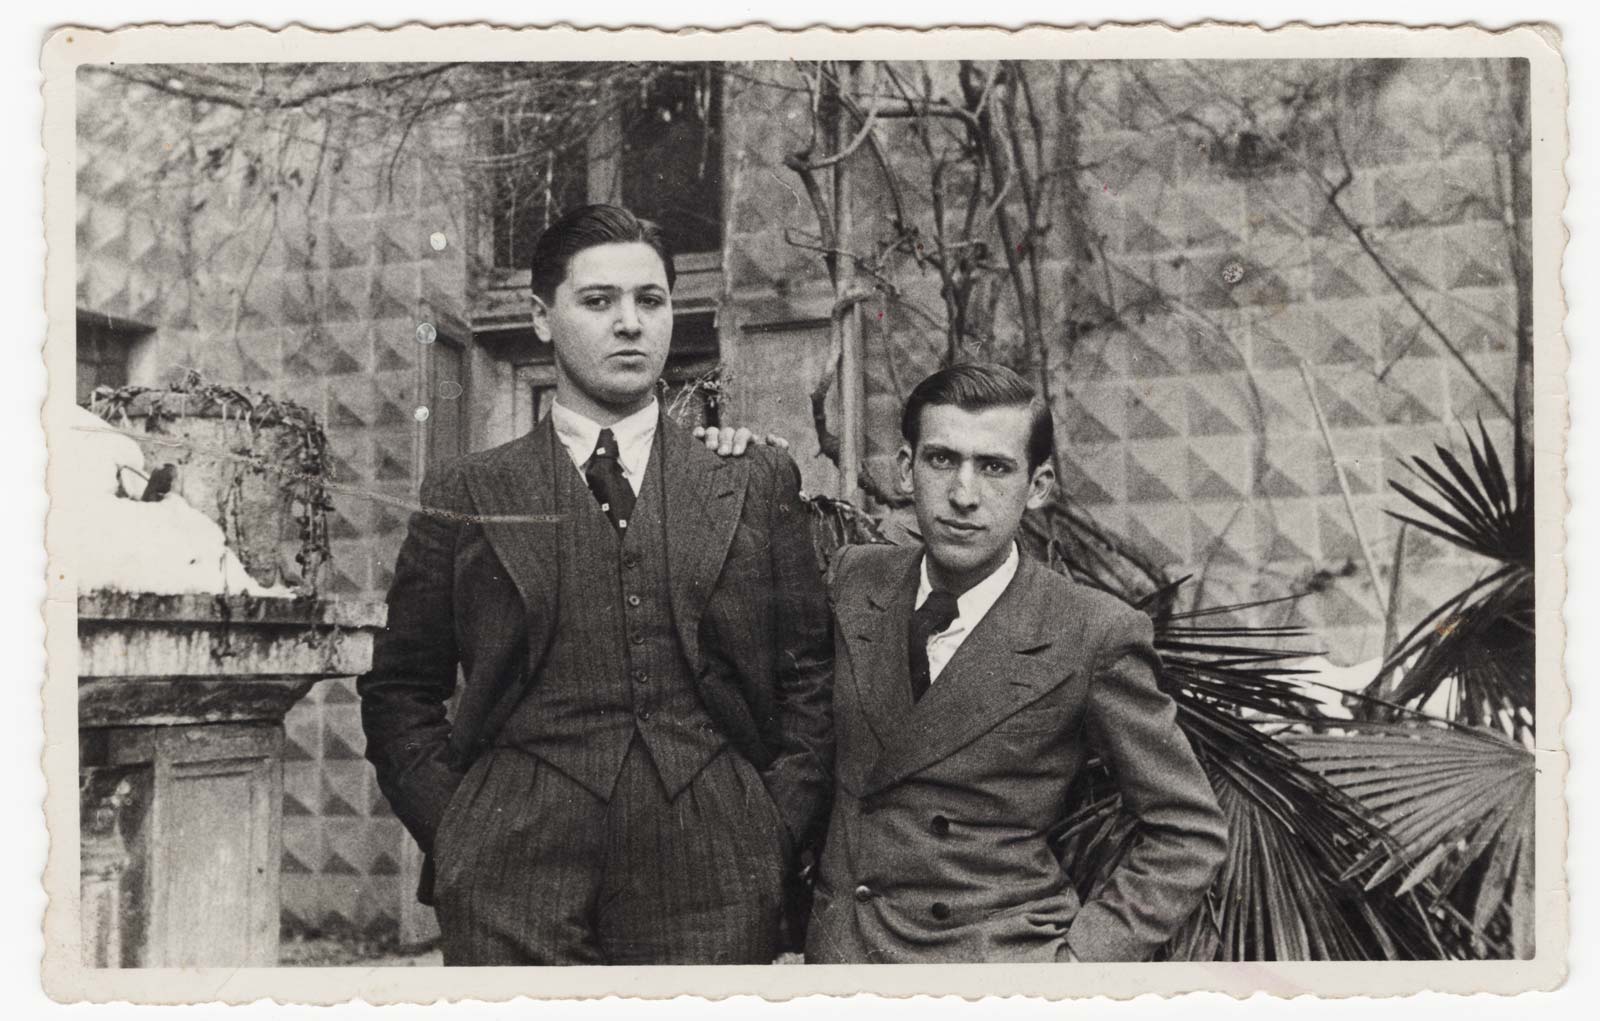 Steinberg with Bruno Leventer, his Bucharest friend and fellow Politecnico student, Milan, c. 1934-36. Saul Steinberg Papers, Beinecke Rare Book and Manuscript Library, Yale University.